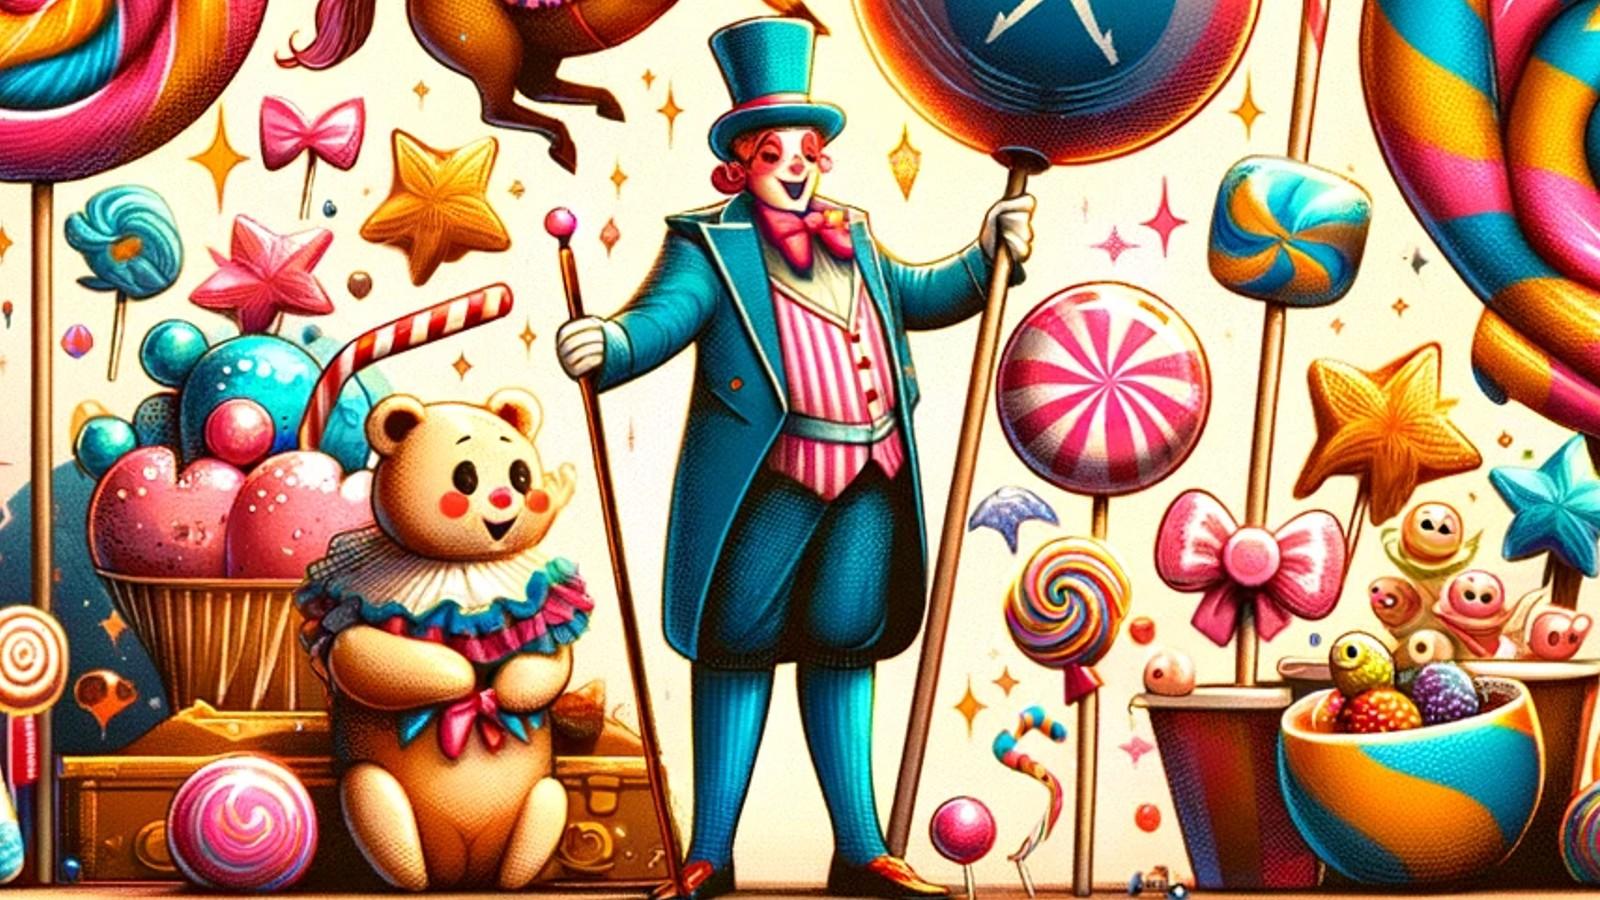 Willy's Chocolate Experience promotional material, featuring a character who looks like Wonka.